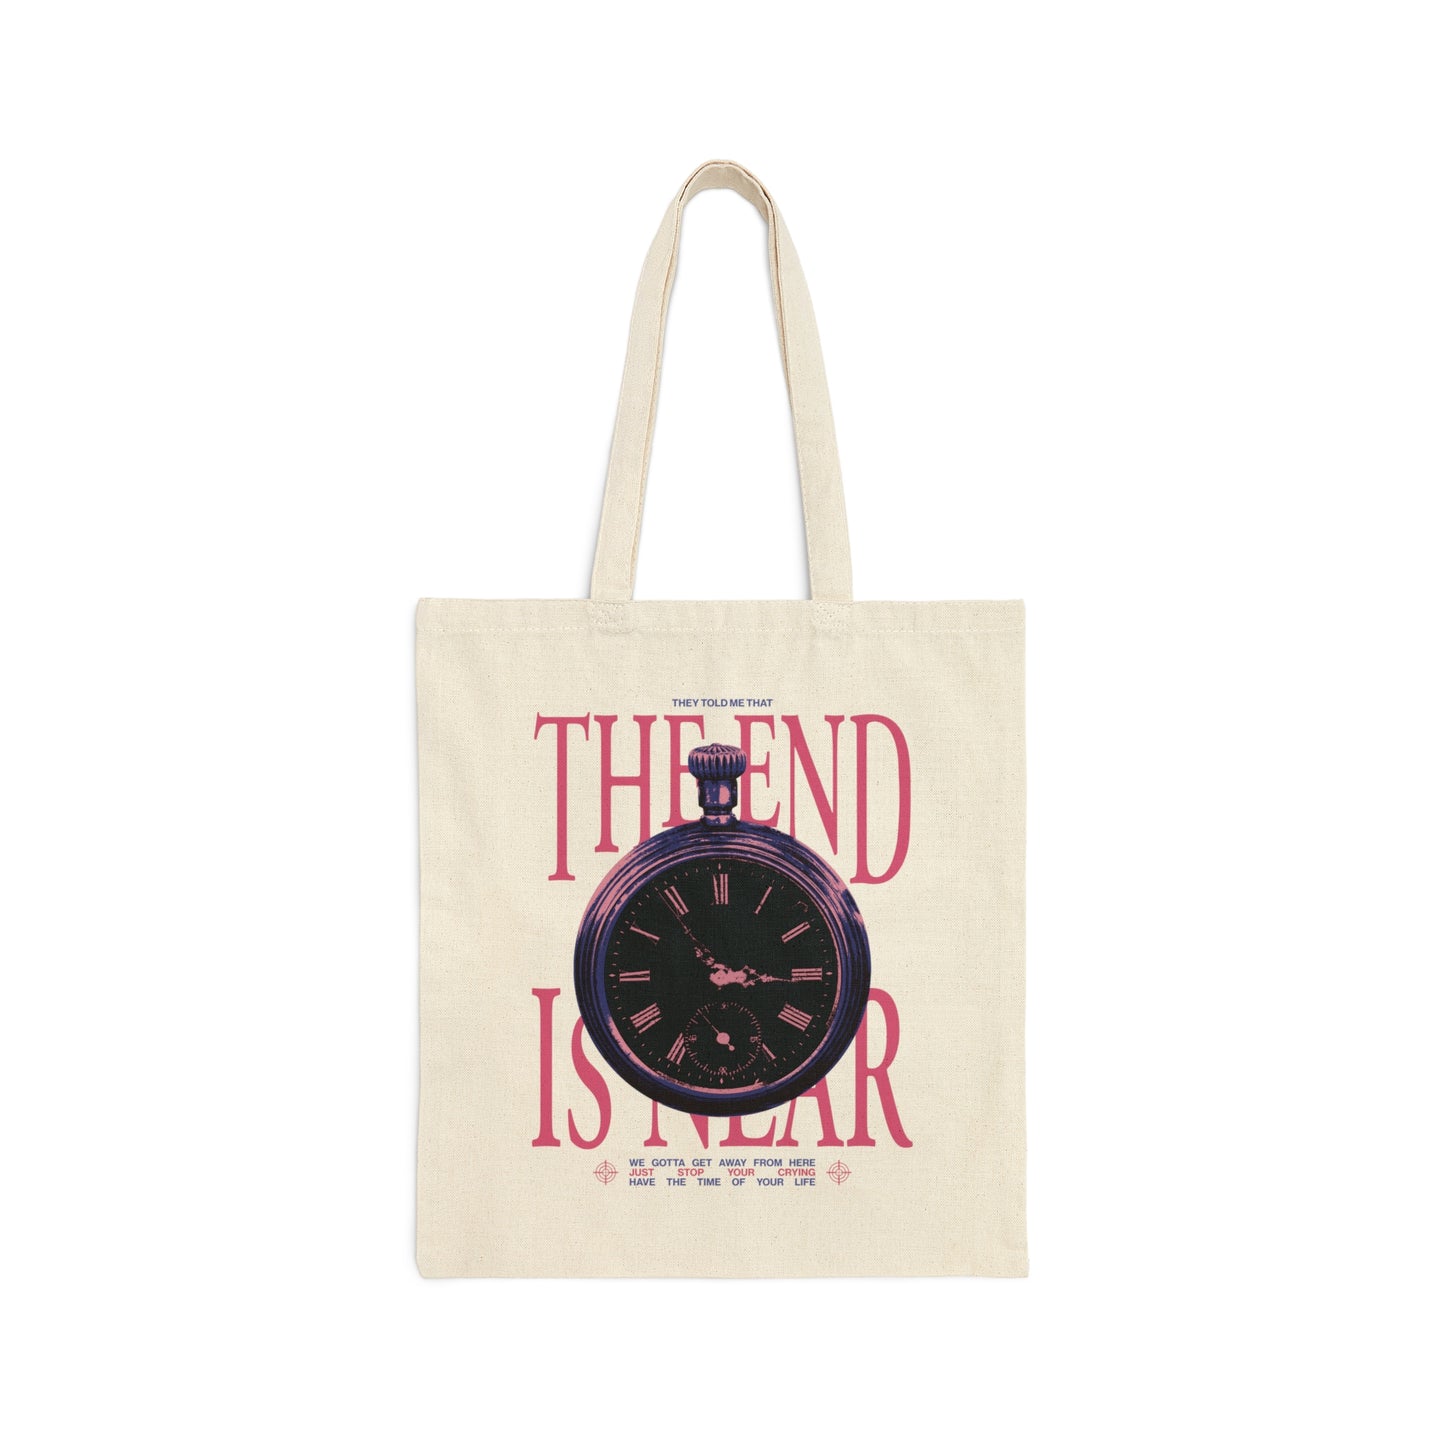 Sign of the Times Tote Bag